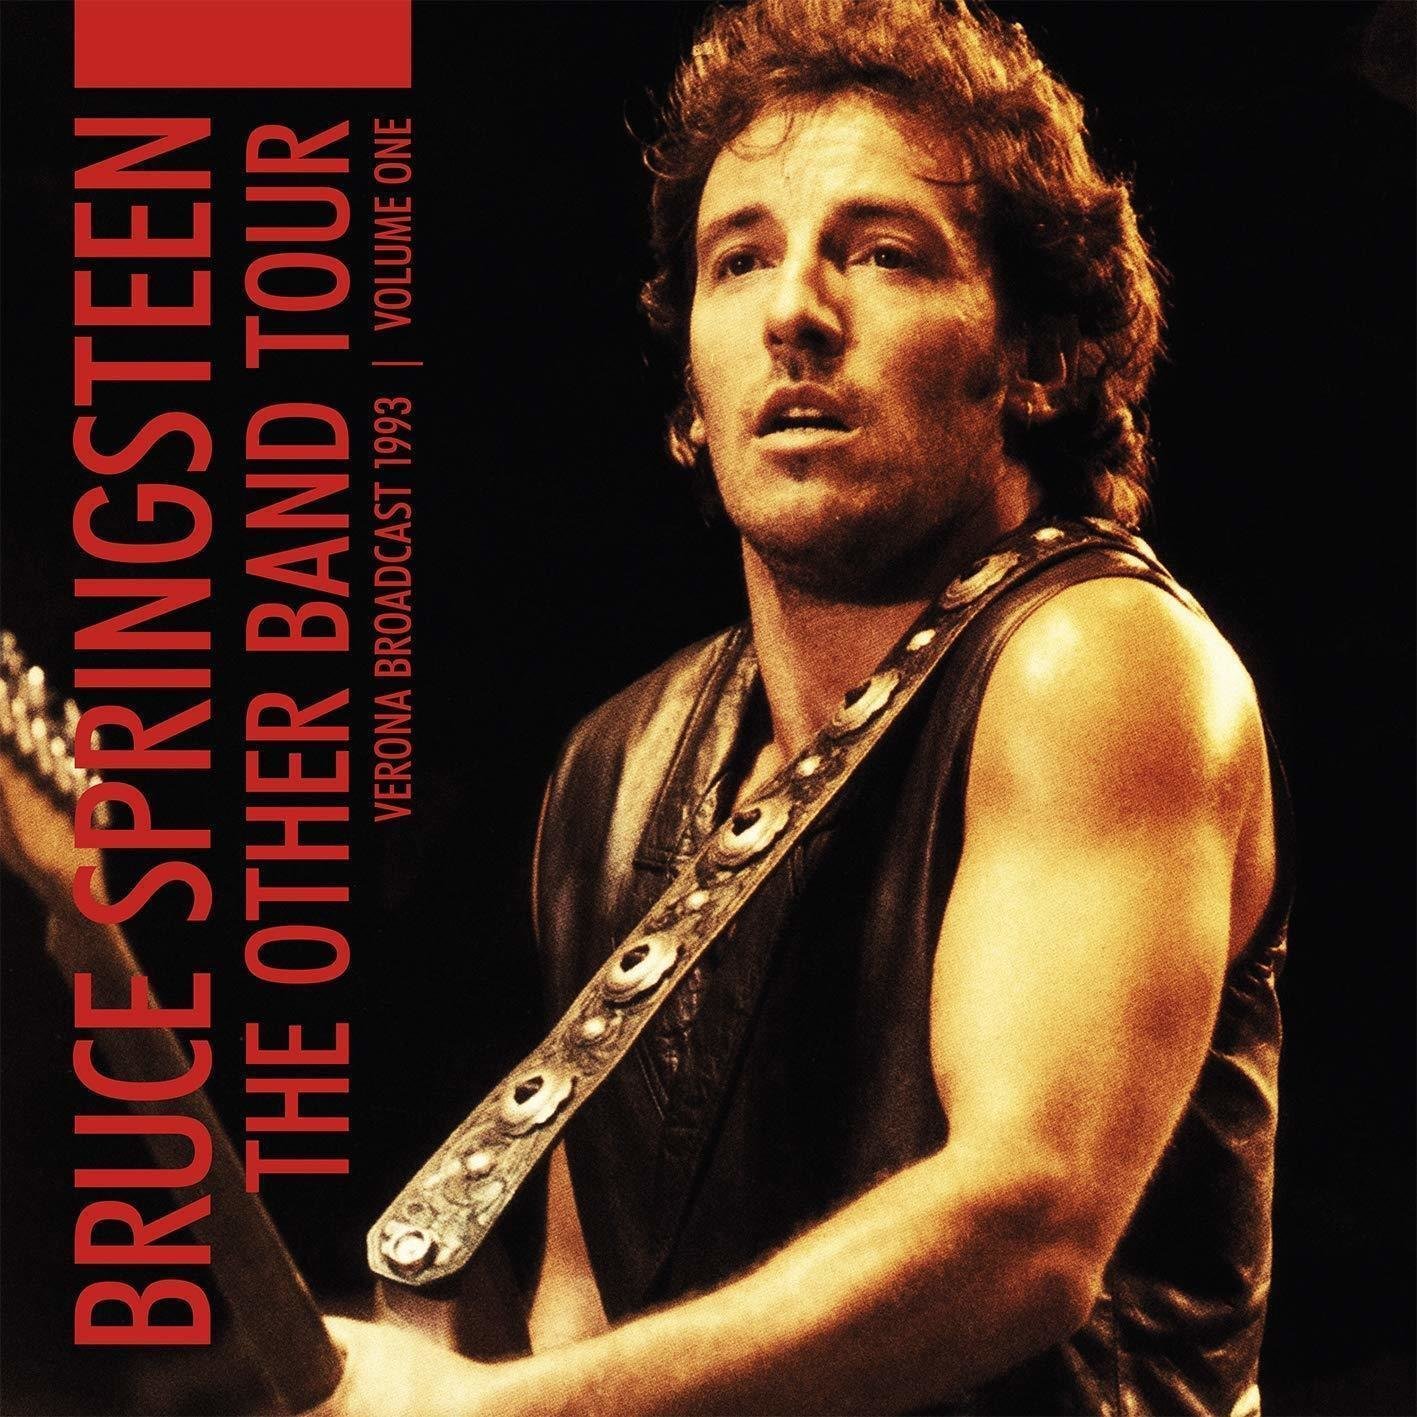 LP Bruce Springsteen - The Other Band Tour - Verona Broadcast 1993 - Volume One (2 LP)